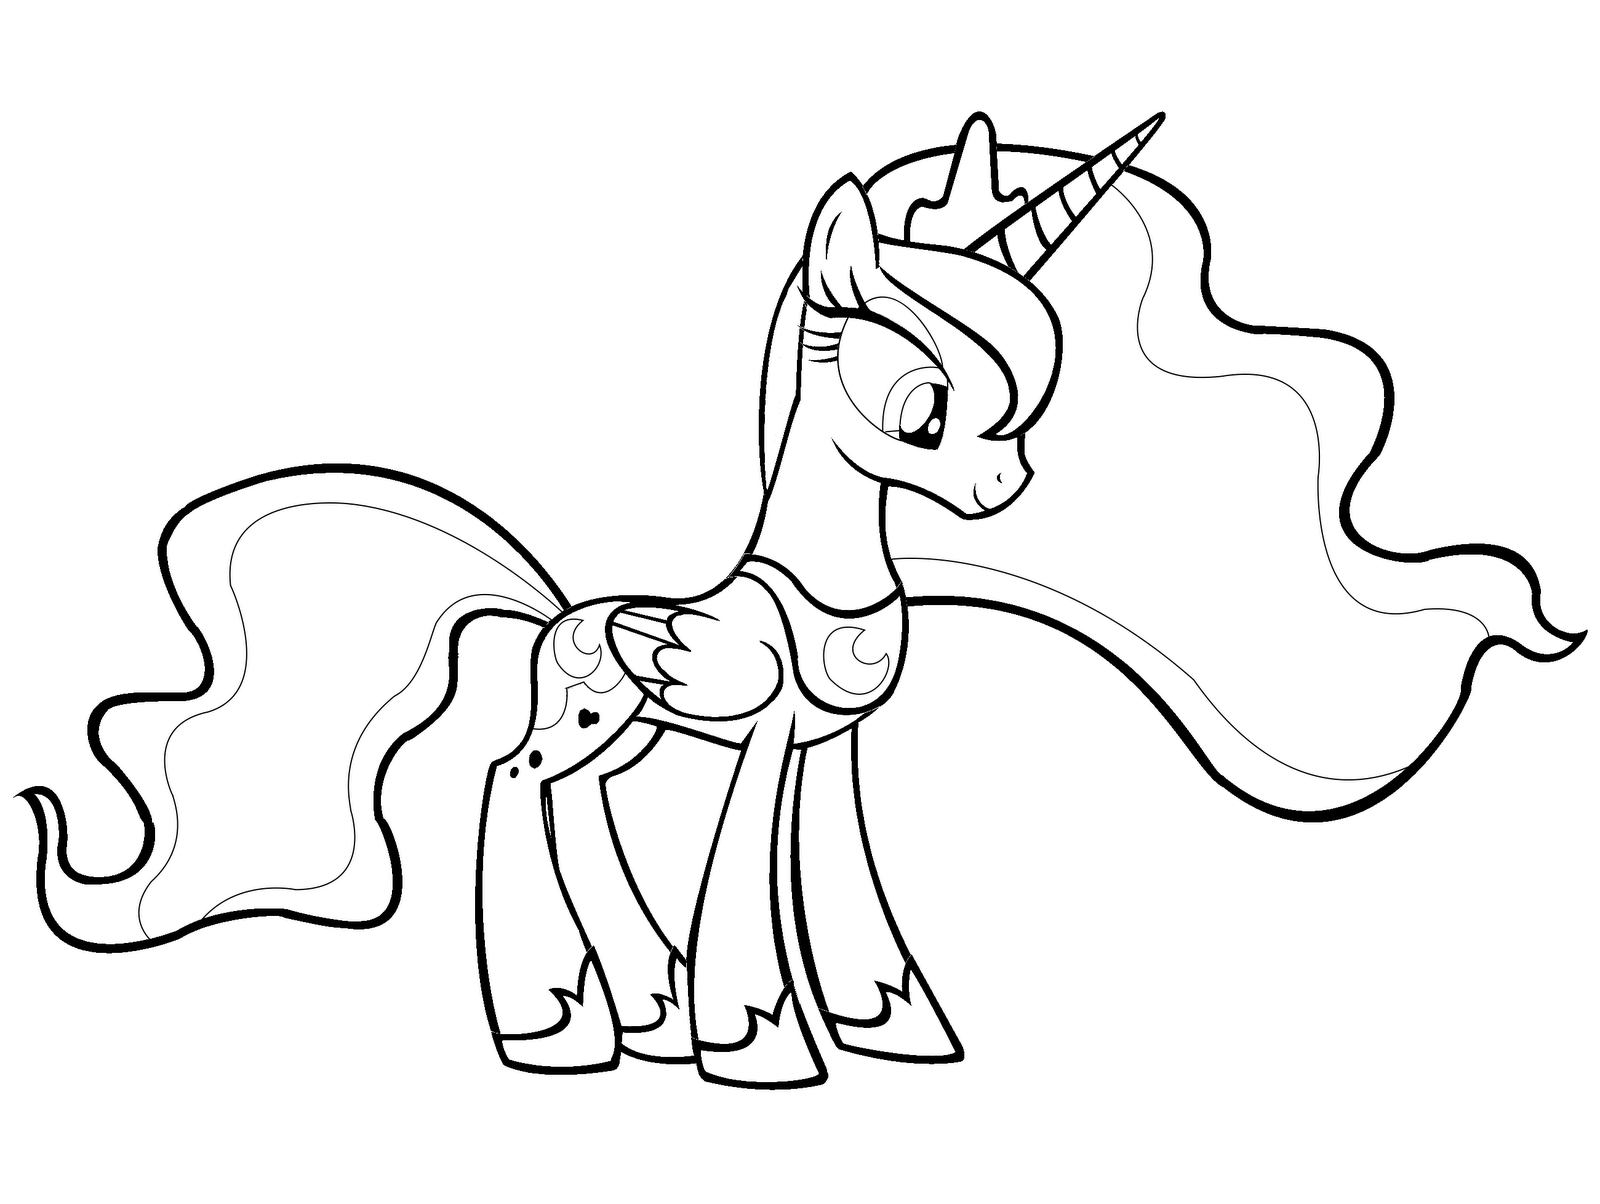 My Little Pony Luna Coloring Pages at GetColorings.com | Free printable